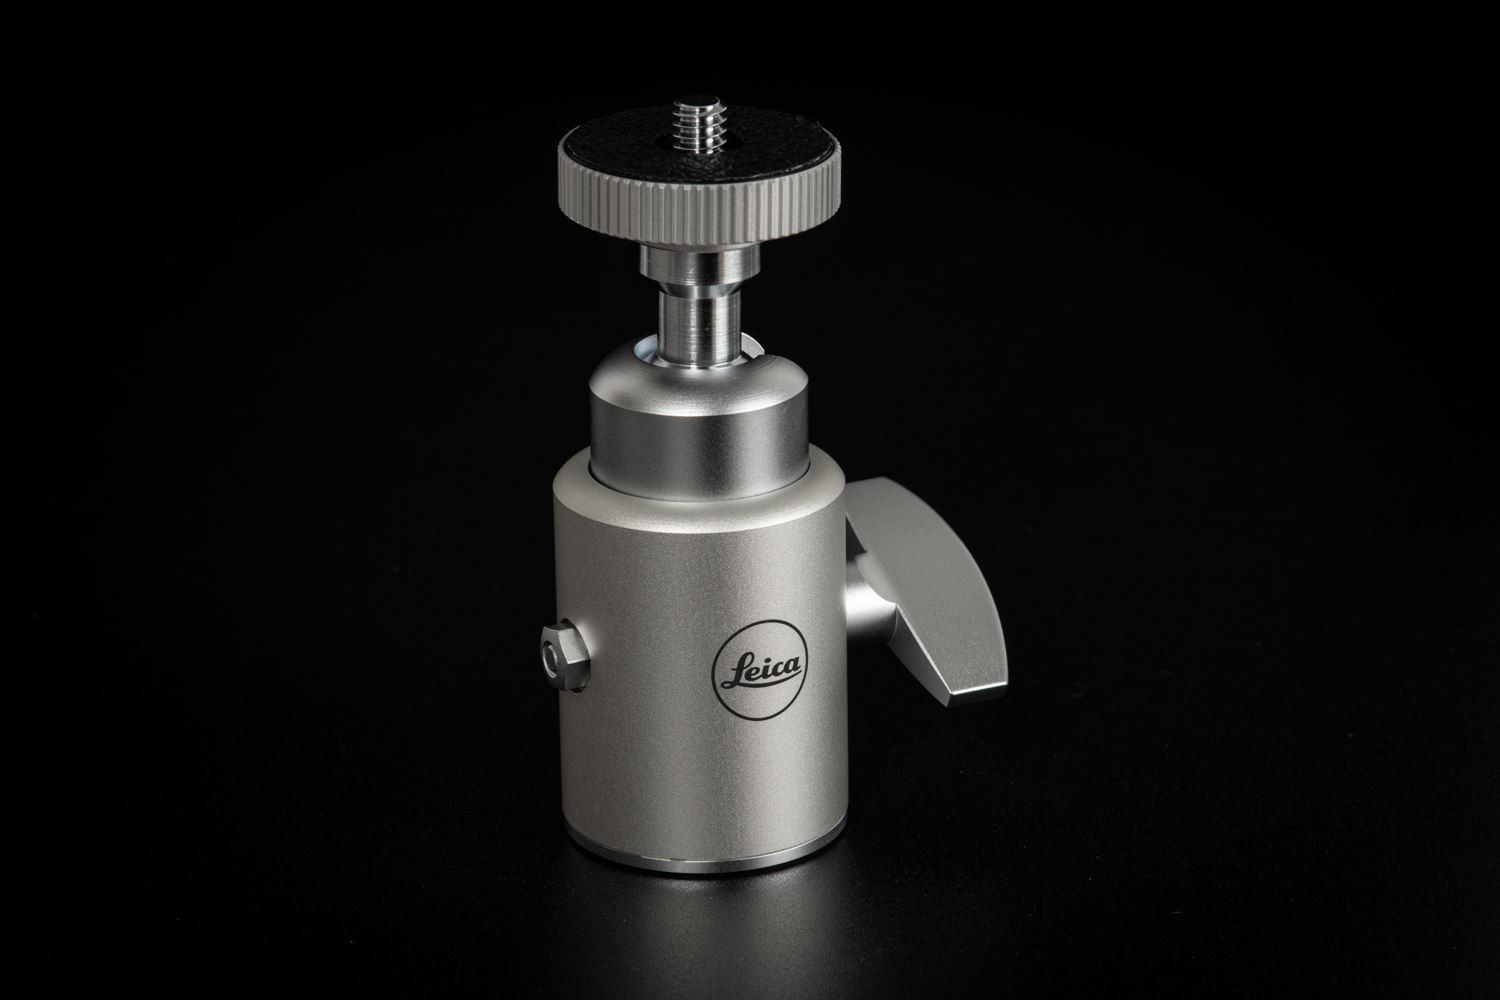 Picture of Leica Ball head 18, small, silver anodize finish